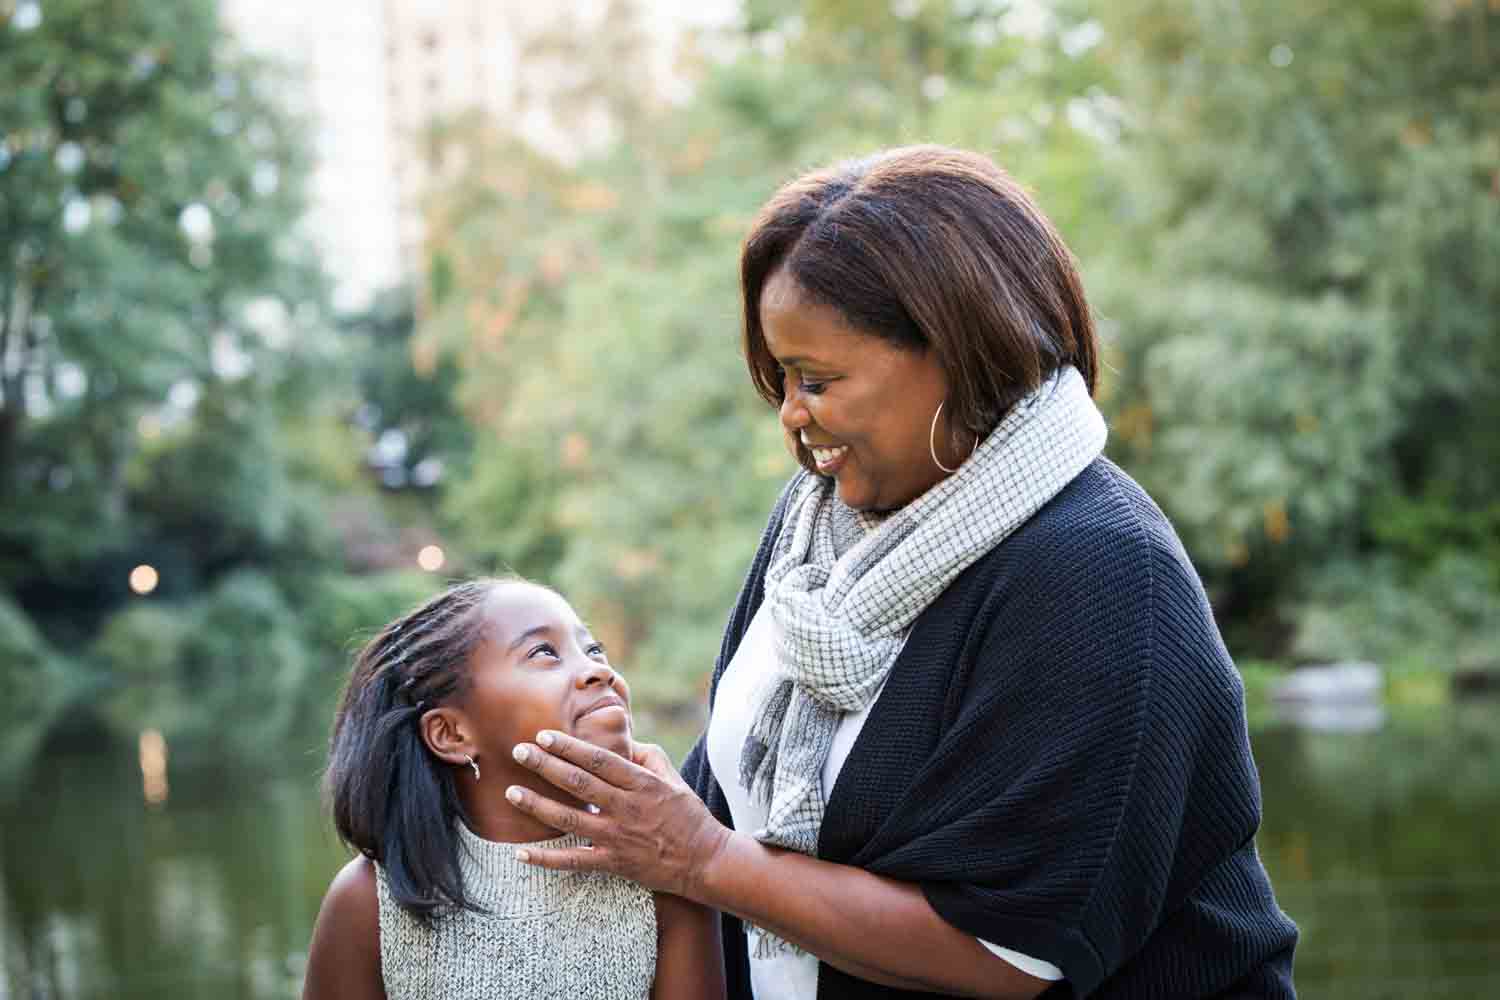 Central Park fall family portrait of mother touching daughter's face